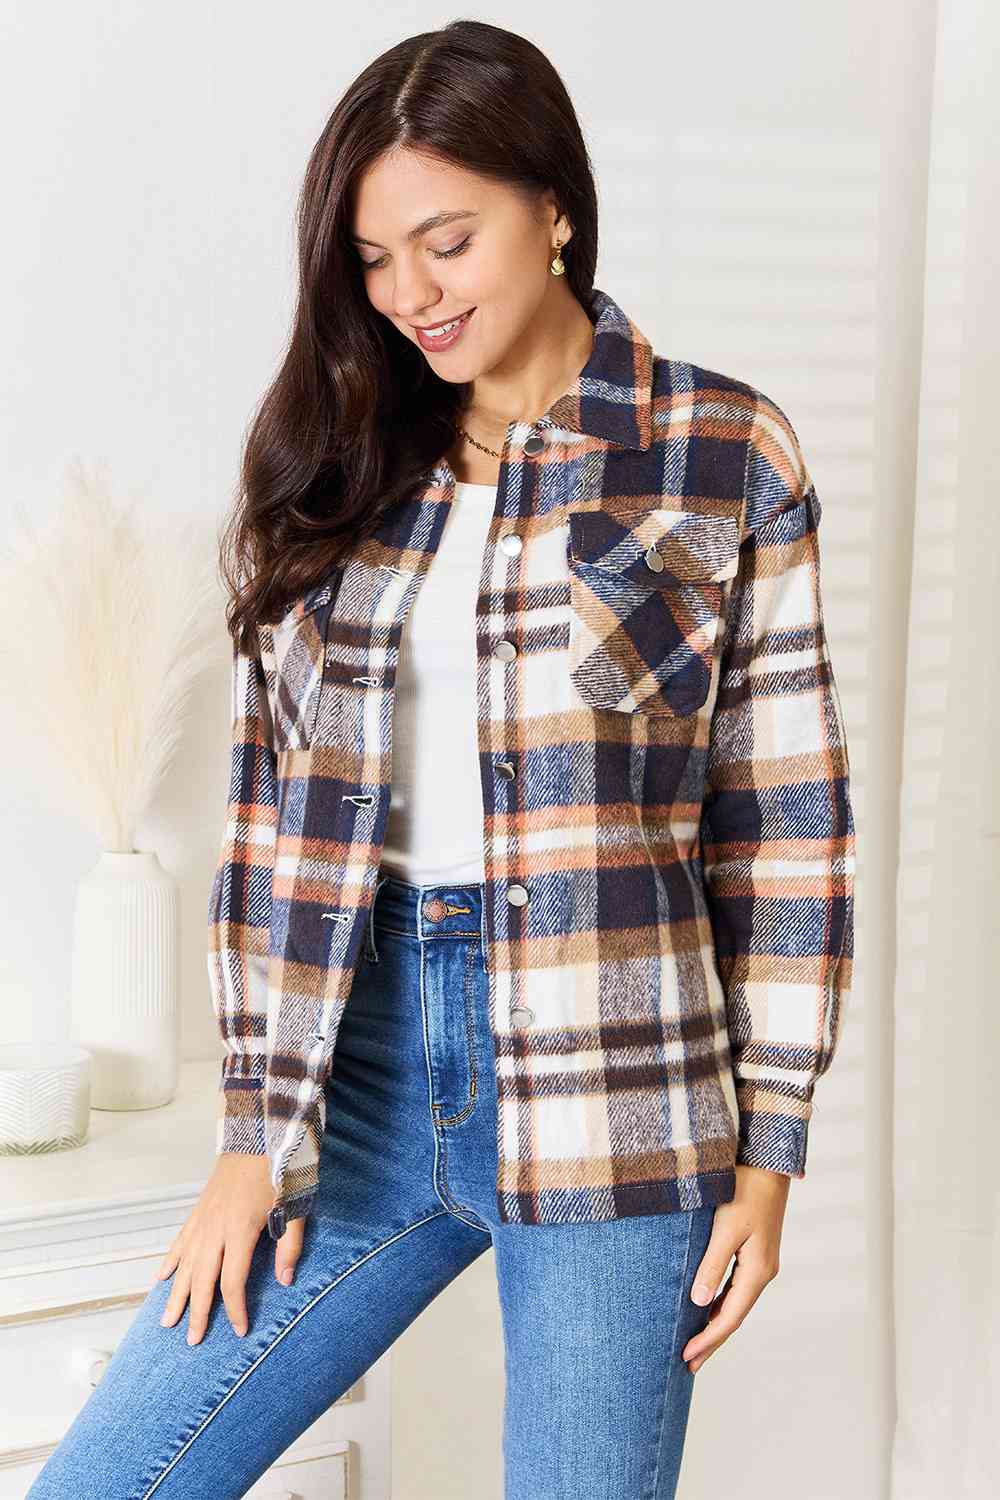 Double Take Plaid Button Front Shirt Jacket with Breast Pockets Double Take